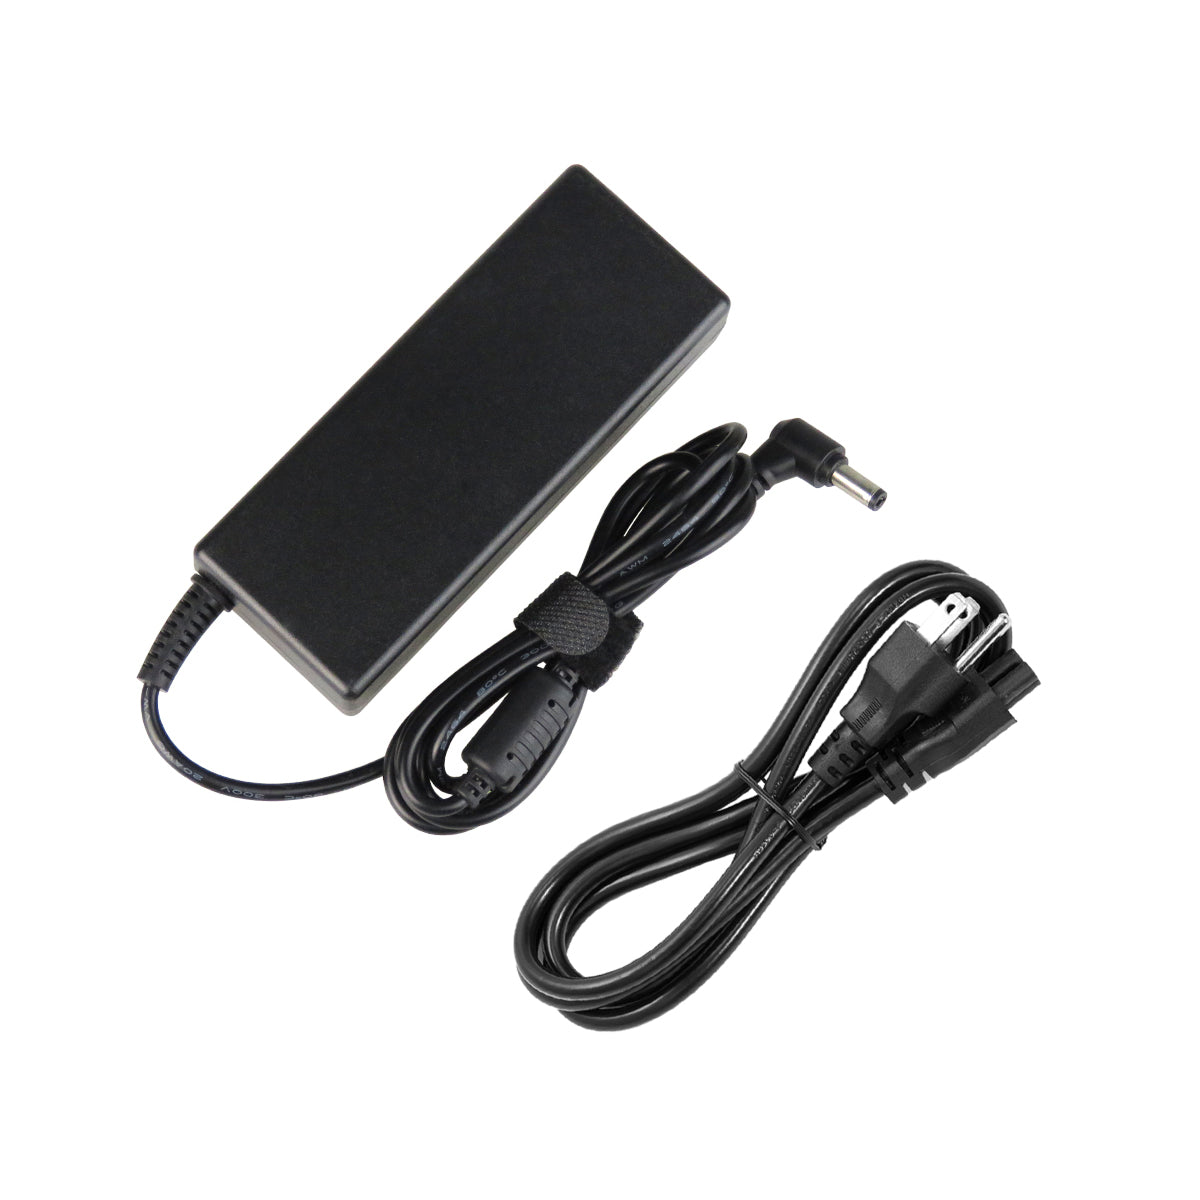 AC Adapter Charger for ASUS N60 Notebook.